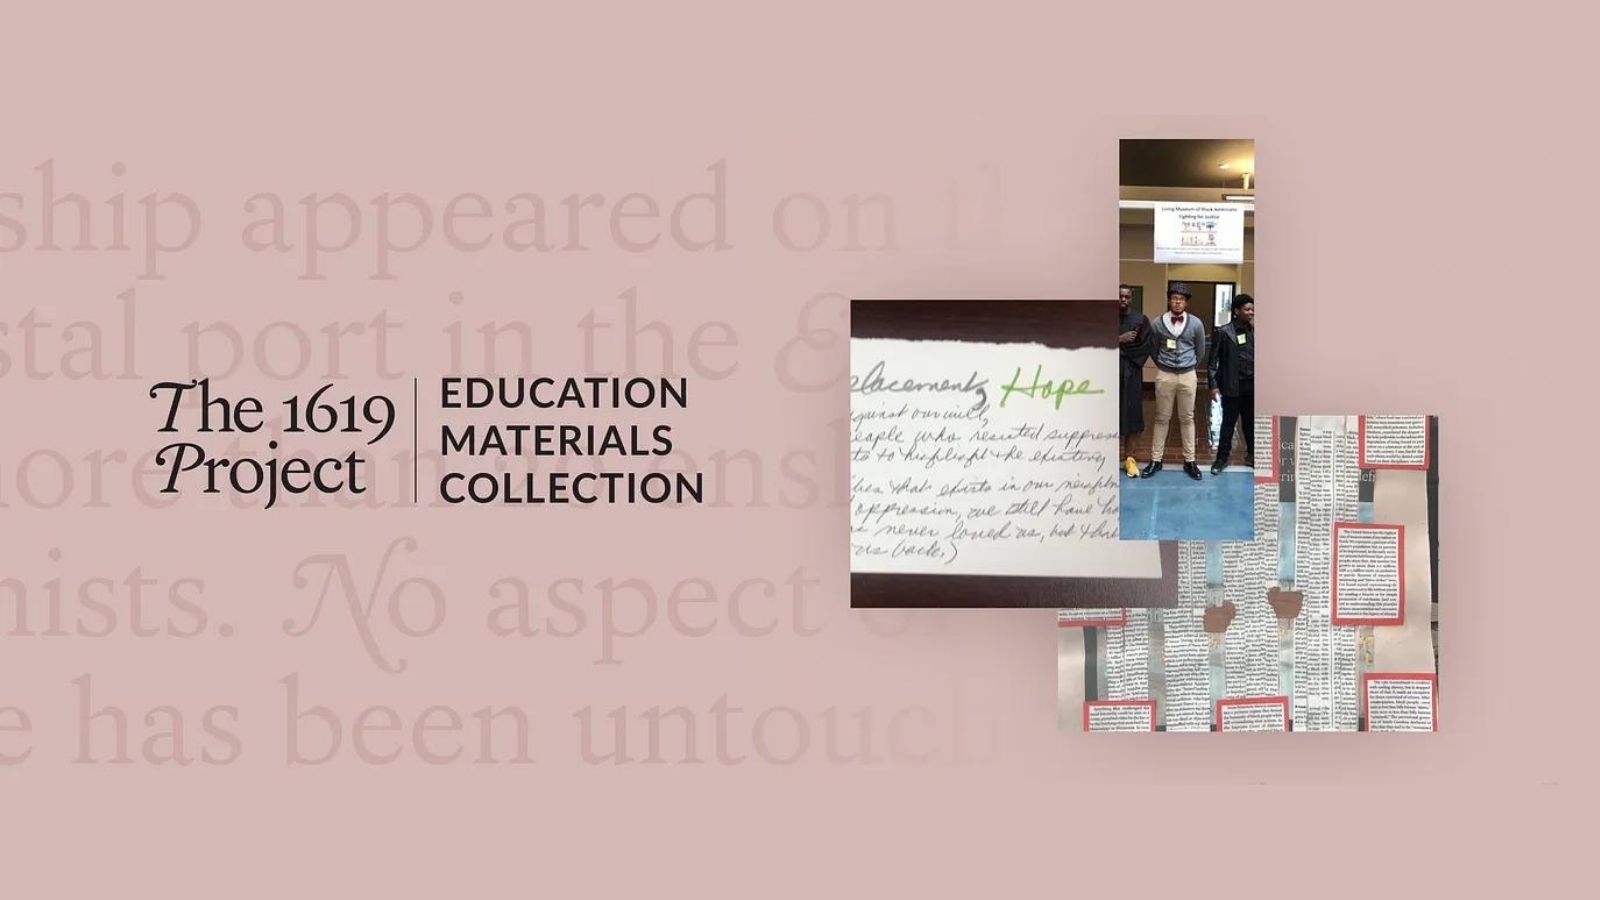 The 1619 Project | Education Materials Collection logo, aside a collage of collection artifact images.